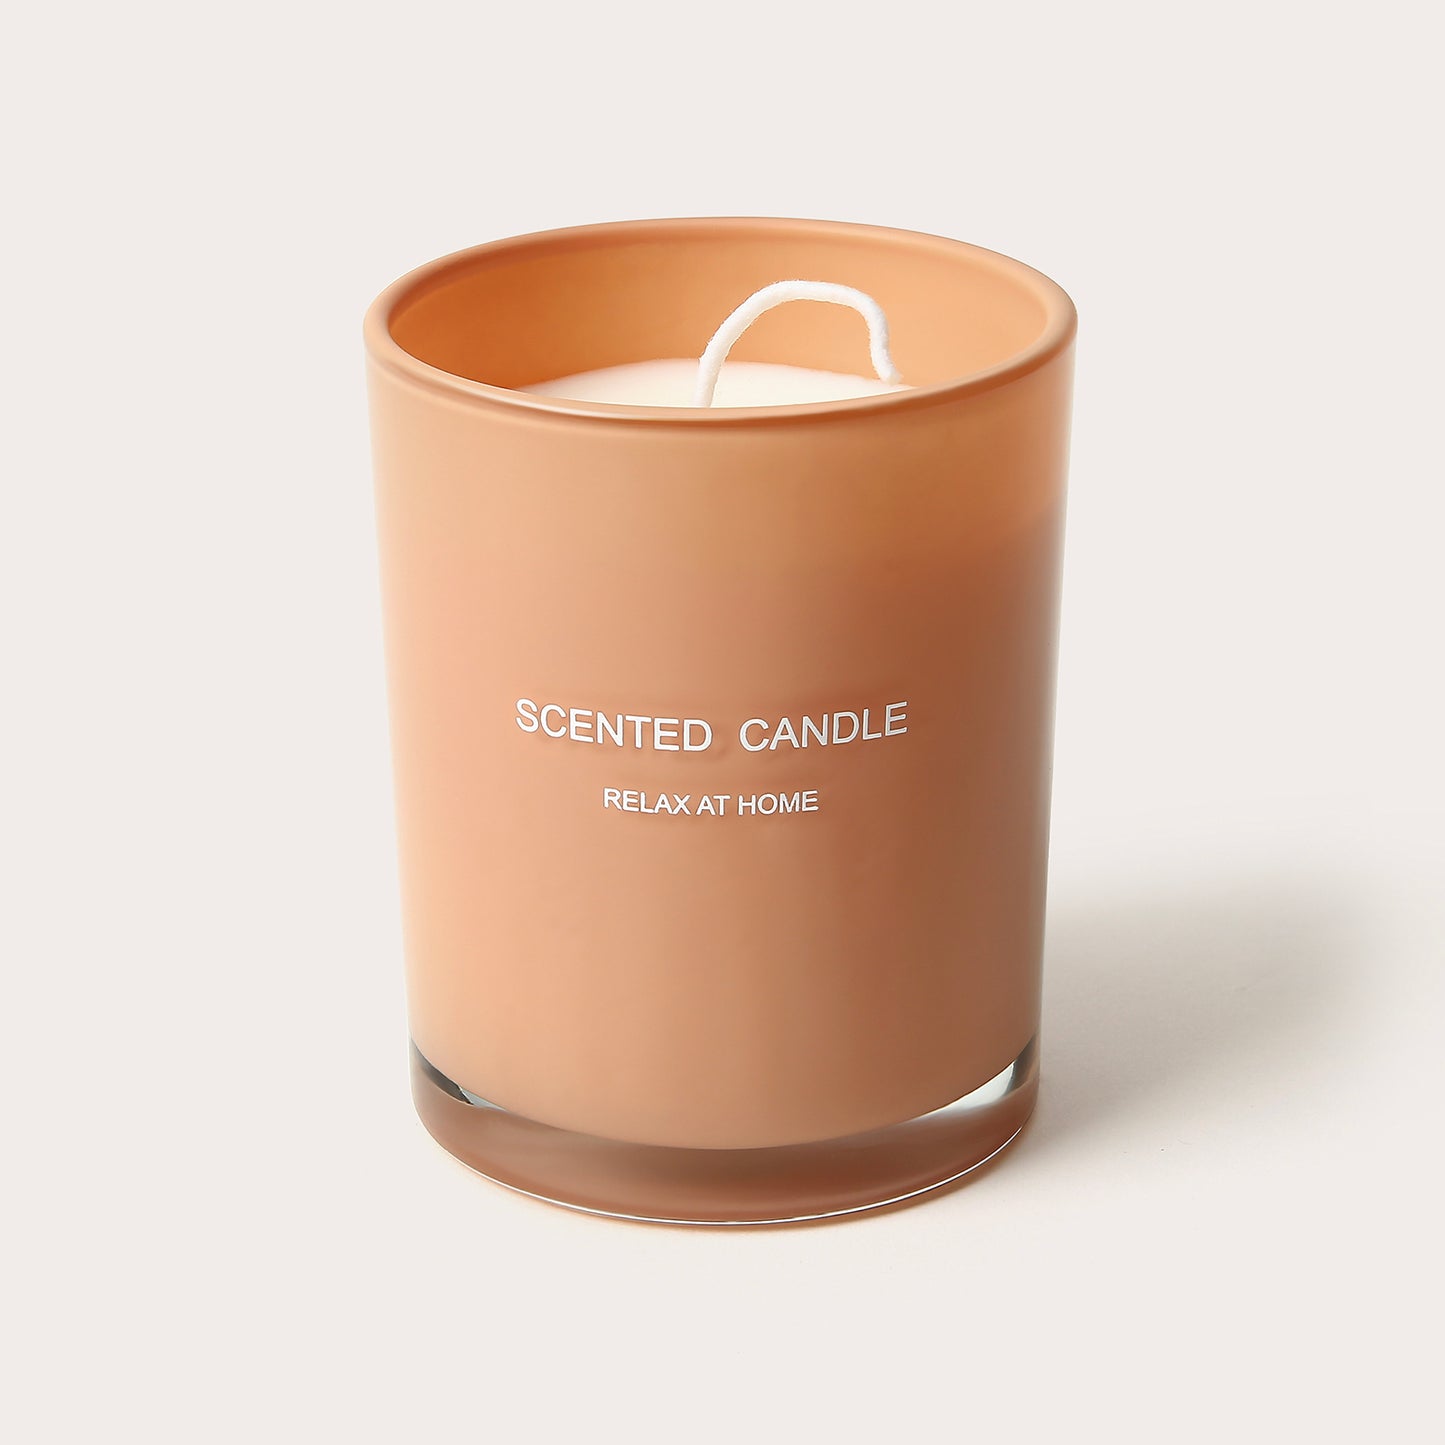 REJUUV SCENTED CANDLES CUP CANDLES - MATCHA, GRAY-BLUE, ORANGE, CHAMPAGNE